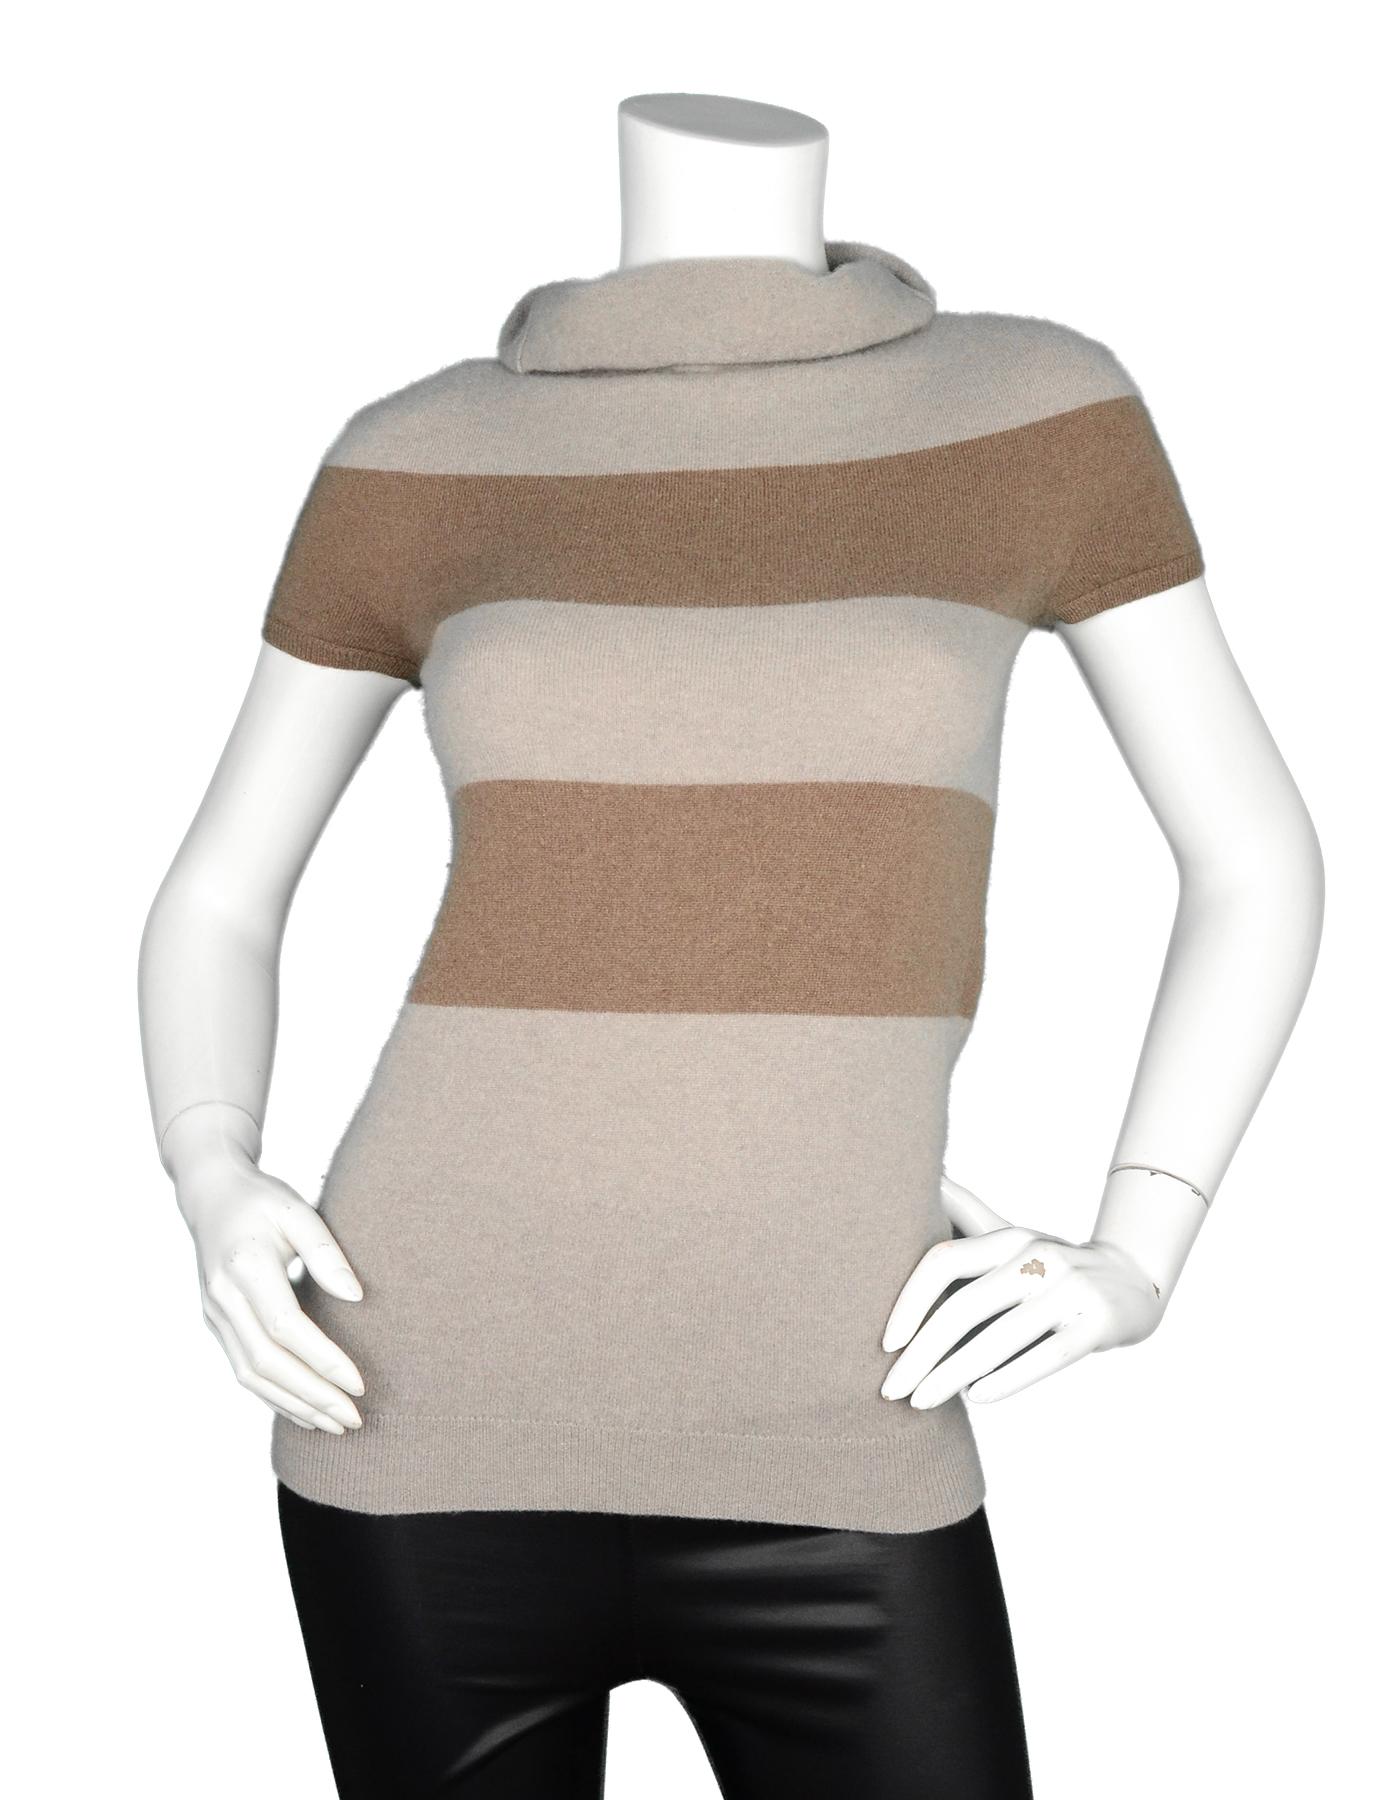 Brunello Cucinelli Grey/Tan Cashmere Short Sleeve Turtleneck Sweater Sz XS

Made In: Italy  
Color: Grey, tan
Materials: 100% cashmere
Opening/Closure: Pull over
Overall Condition: Excellent pre-owned condition with excpetion of minor pilling in